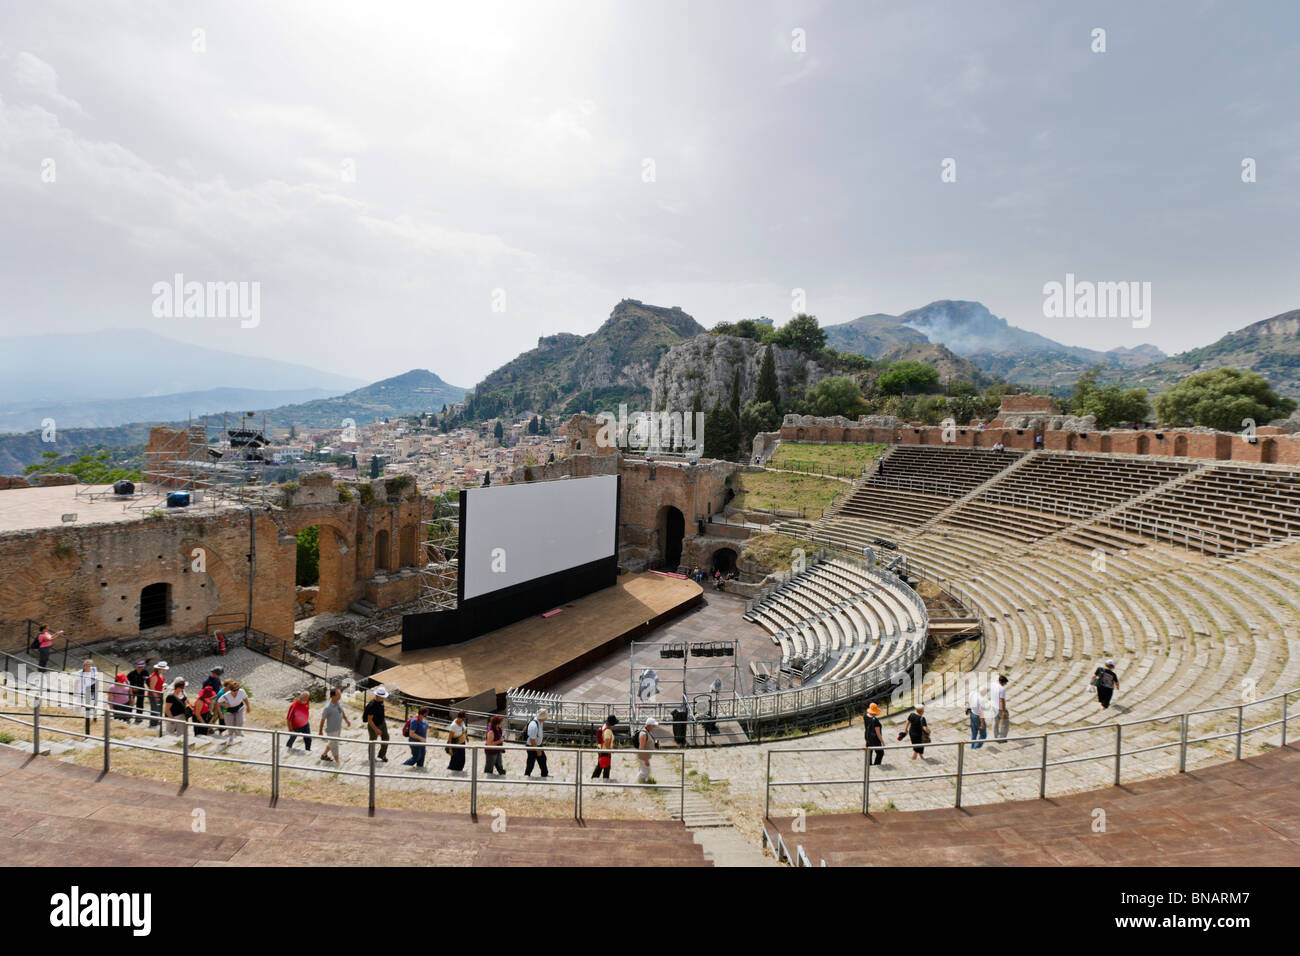 The Greek Theatre (Teatro Greco) set up for the FilmFest film festival in June 2010, Taormina, Sicily, Italy Stock Photo